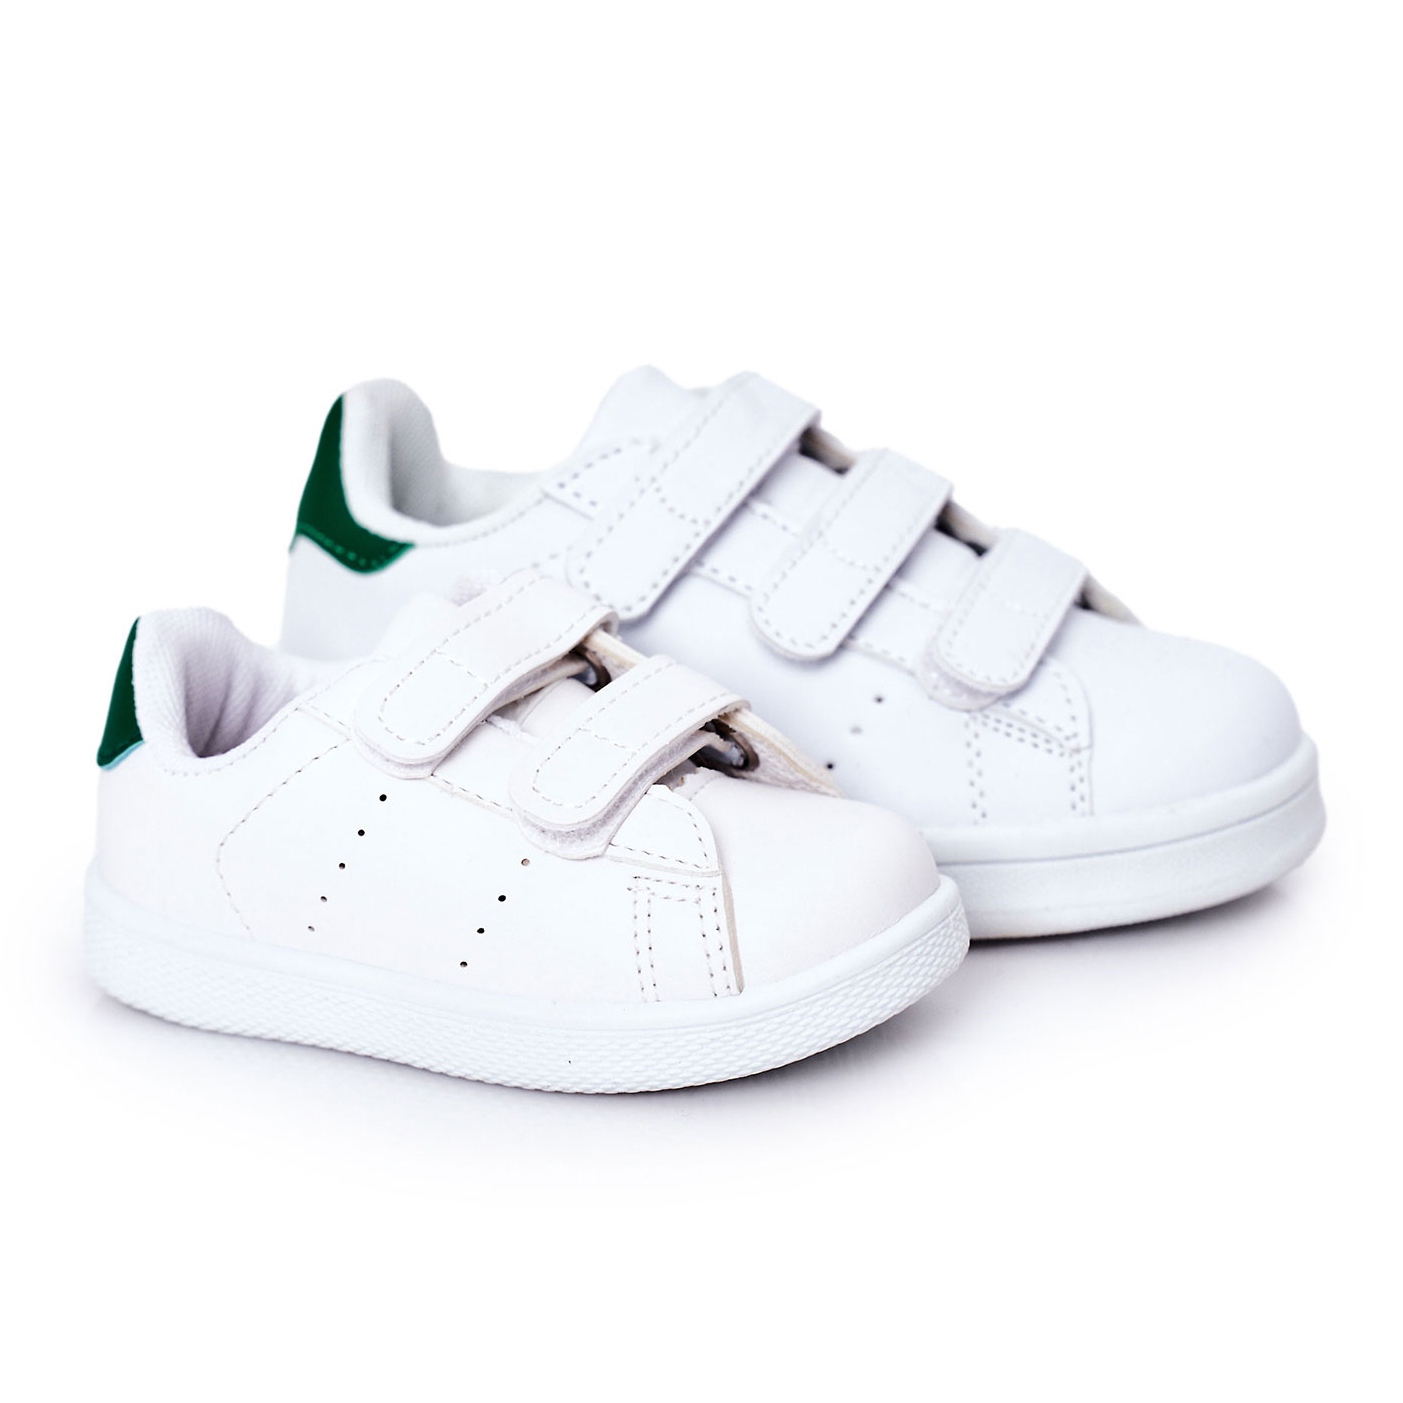 B91xZ Sneakers for Girls Toddler Shoes Children Sports Shoes Light Shoes  Small White Shoes Light Board Shoes Non Slip Soft Bottom Toddler Shoes  ,Sizes 5.5 - Walmart.com